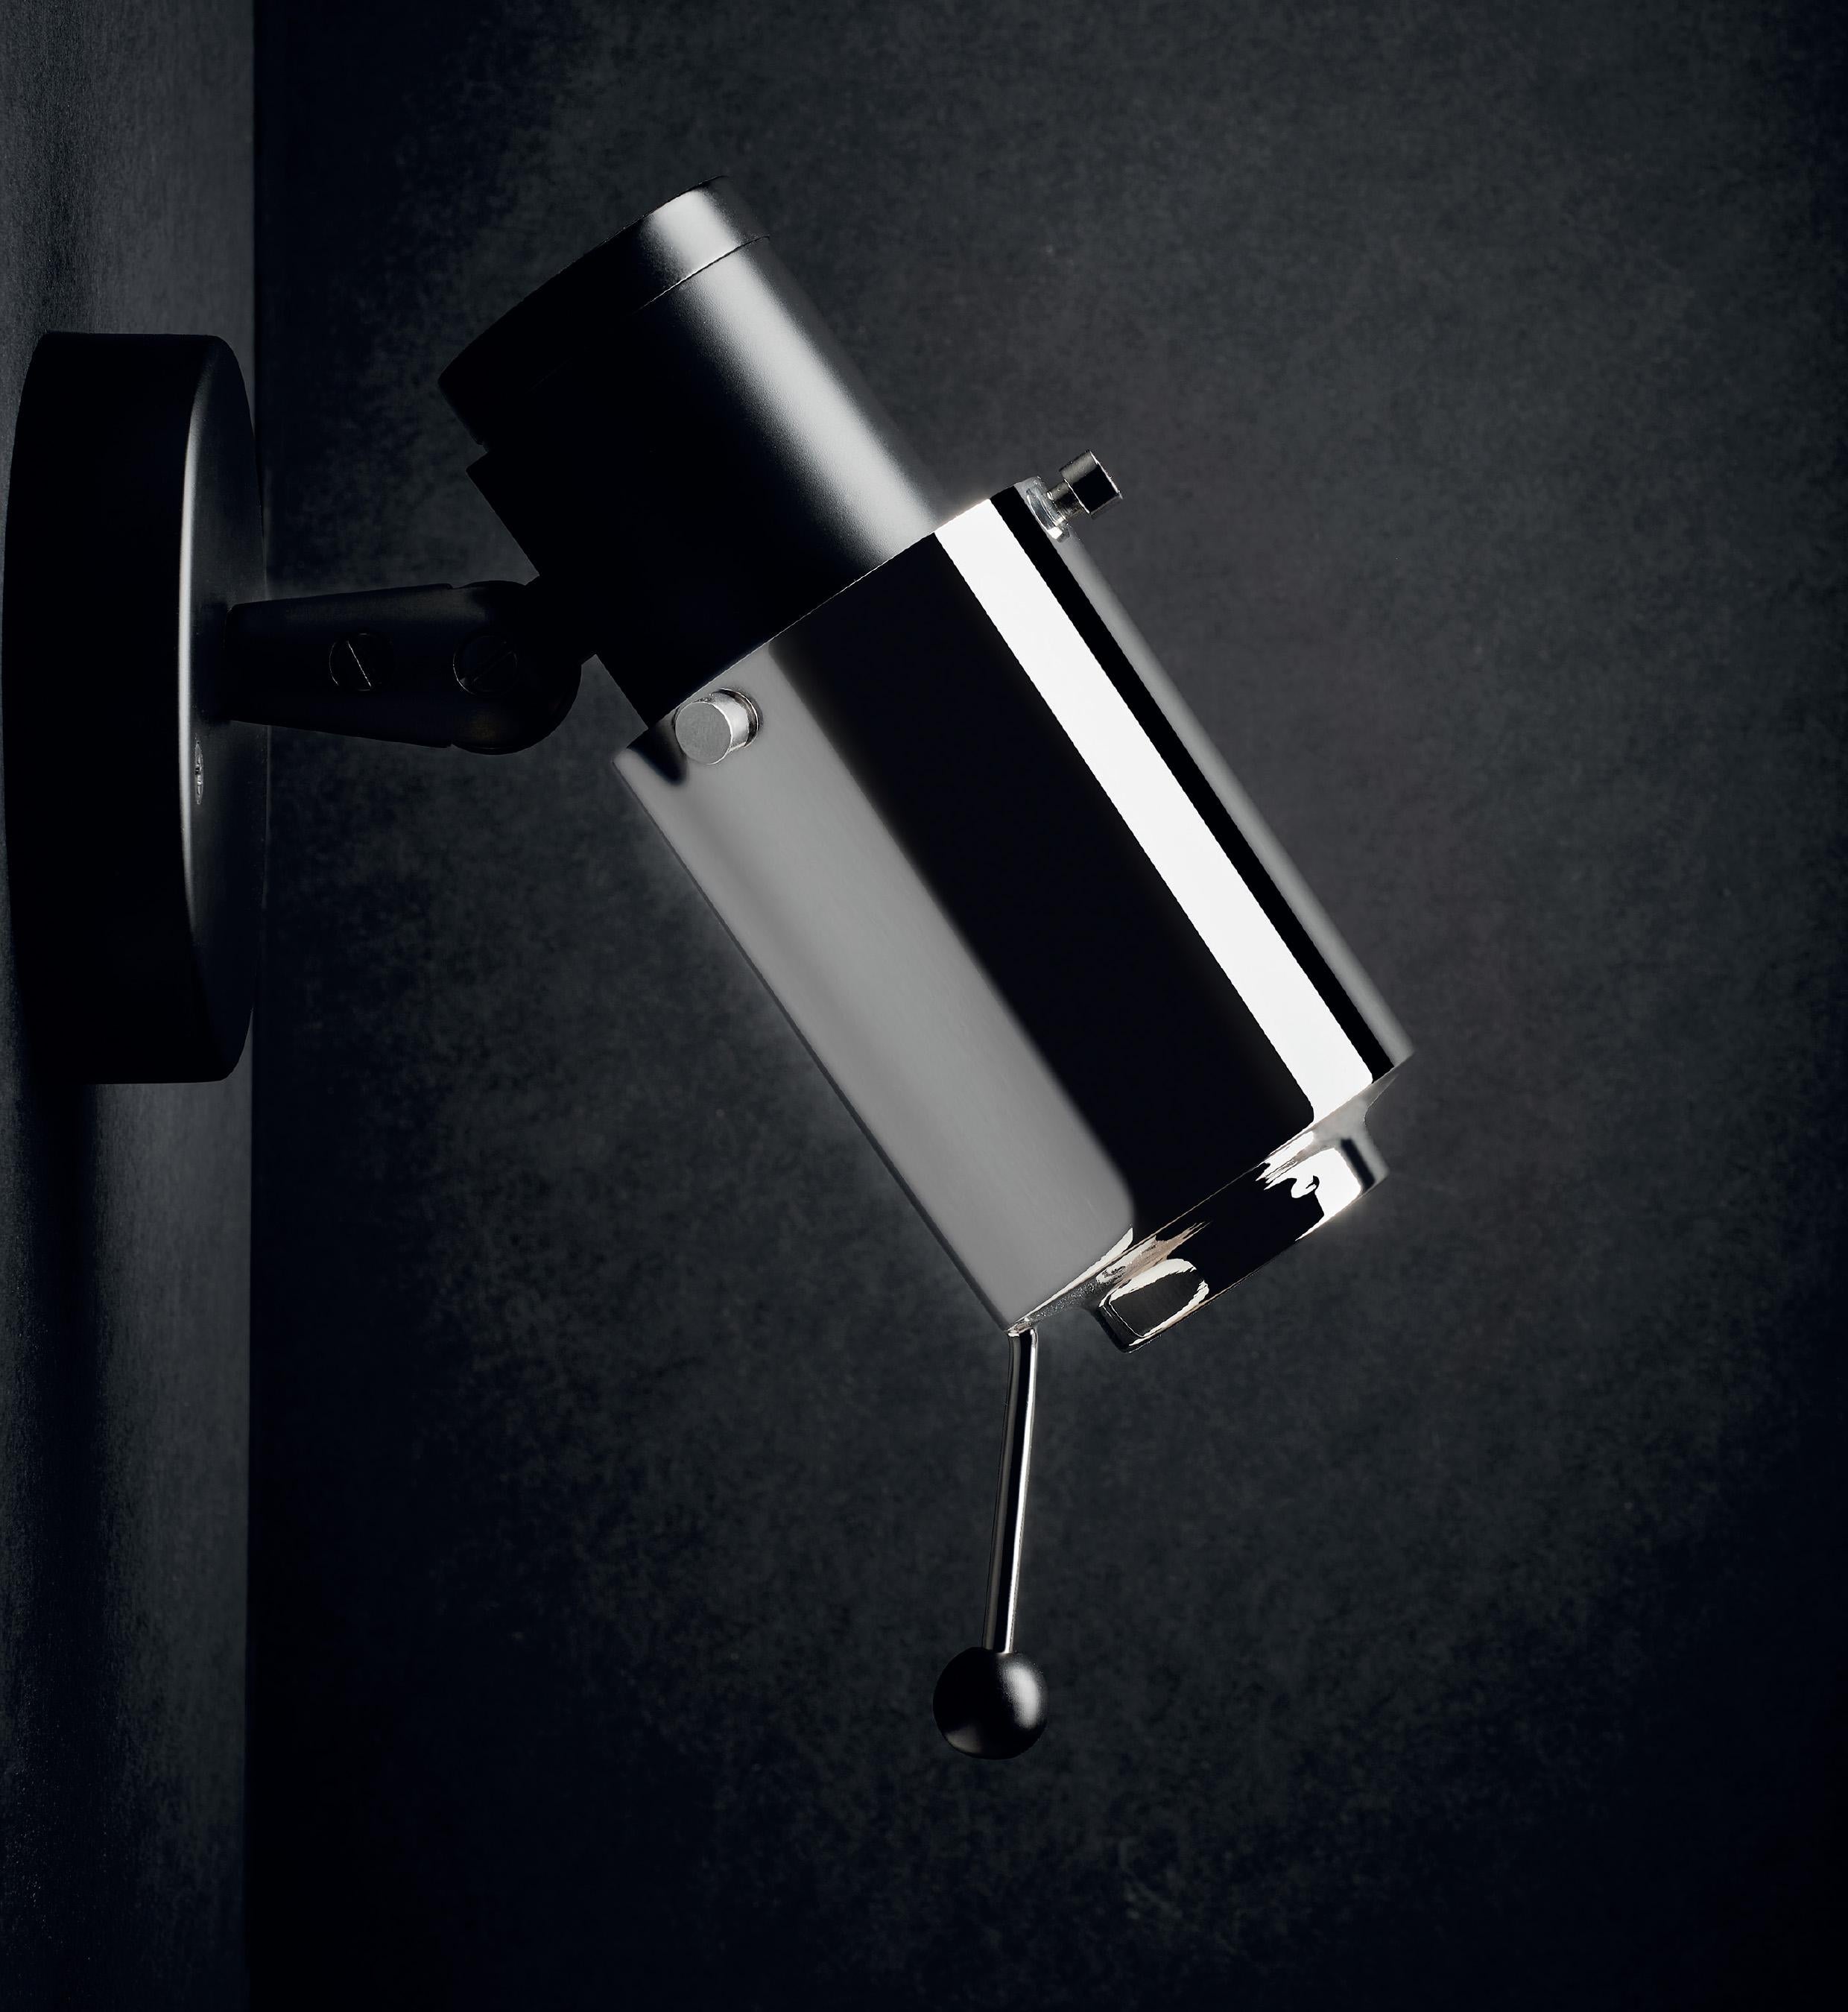 Nickel Biny Spot Wall Lamp by Jacques Biny
Dimensions: D 19.8 x W 6.5 x H 15 cm
Materials: Aluminum, Steel
Also Available: Different colors, with or without switch, with or without stick, led or bulb version, please contact us.

All our lamps can be